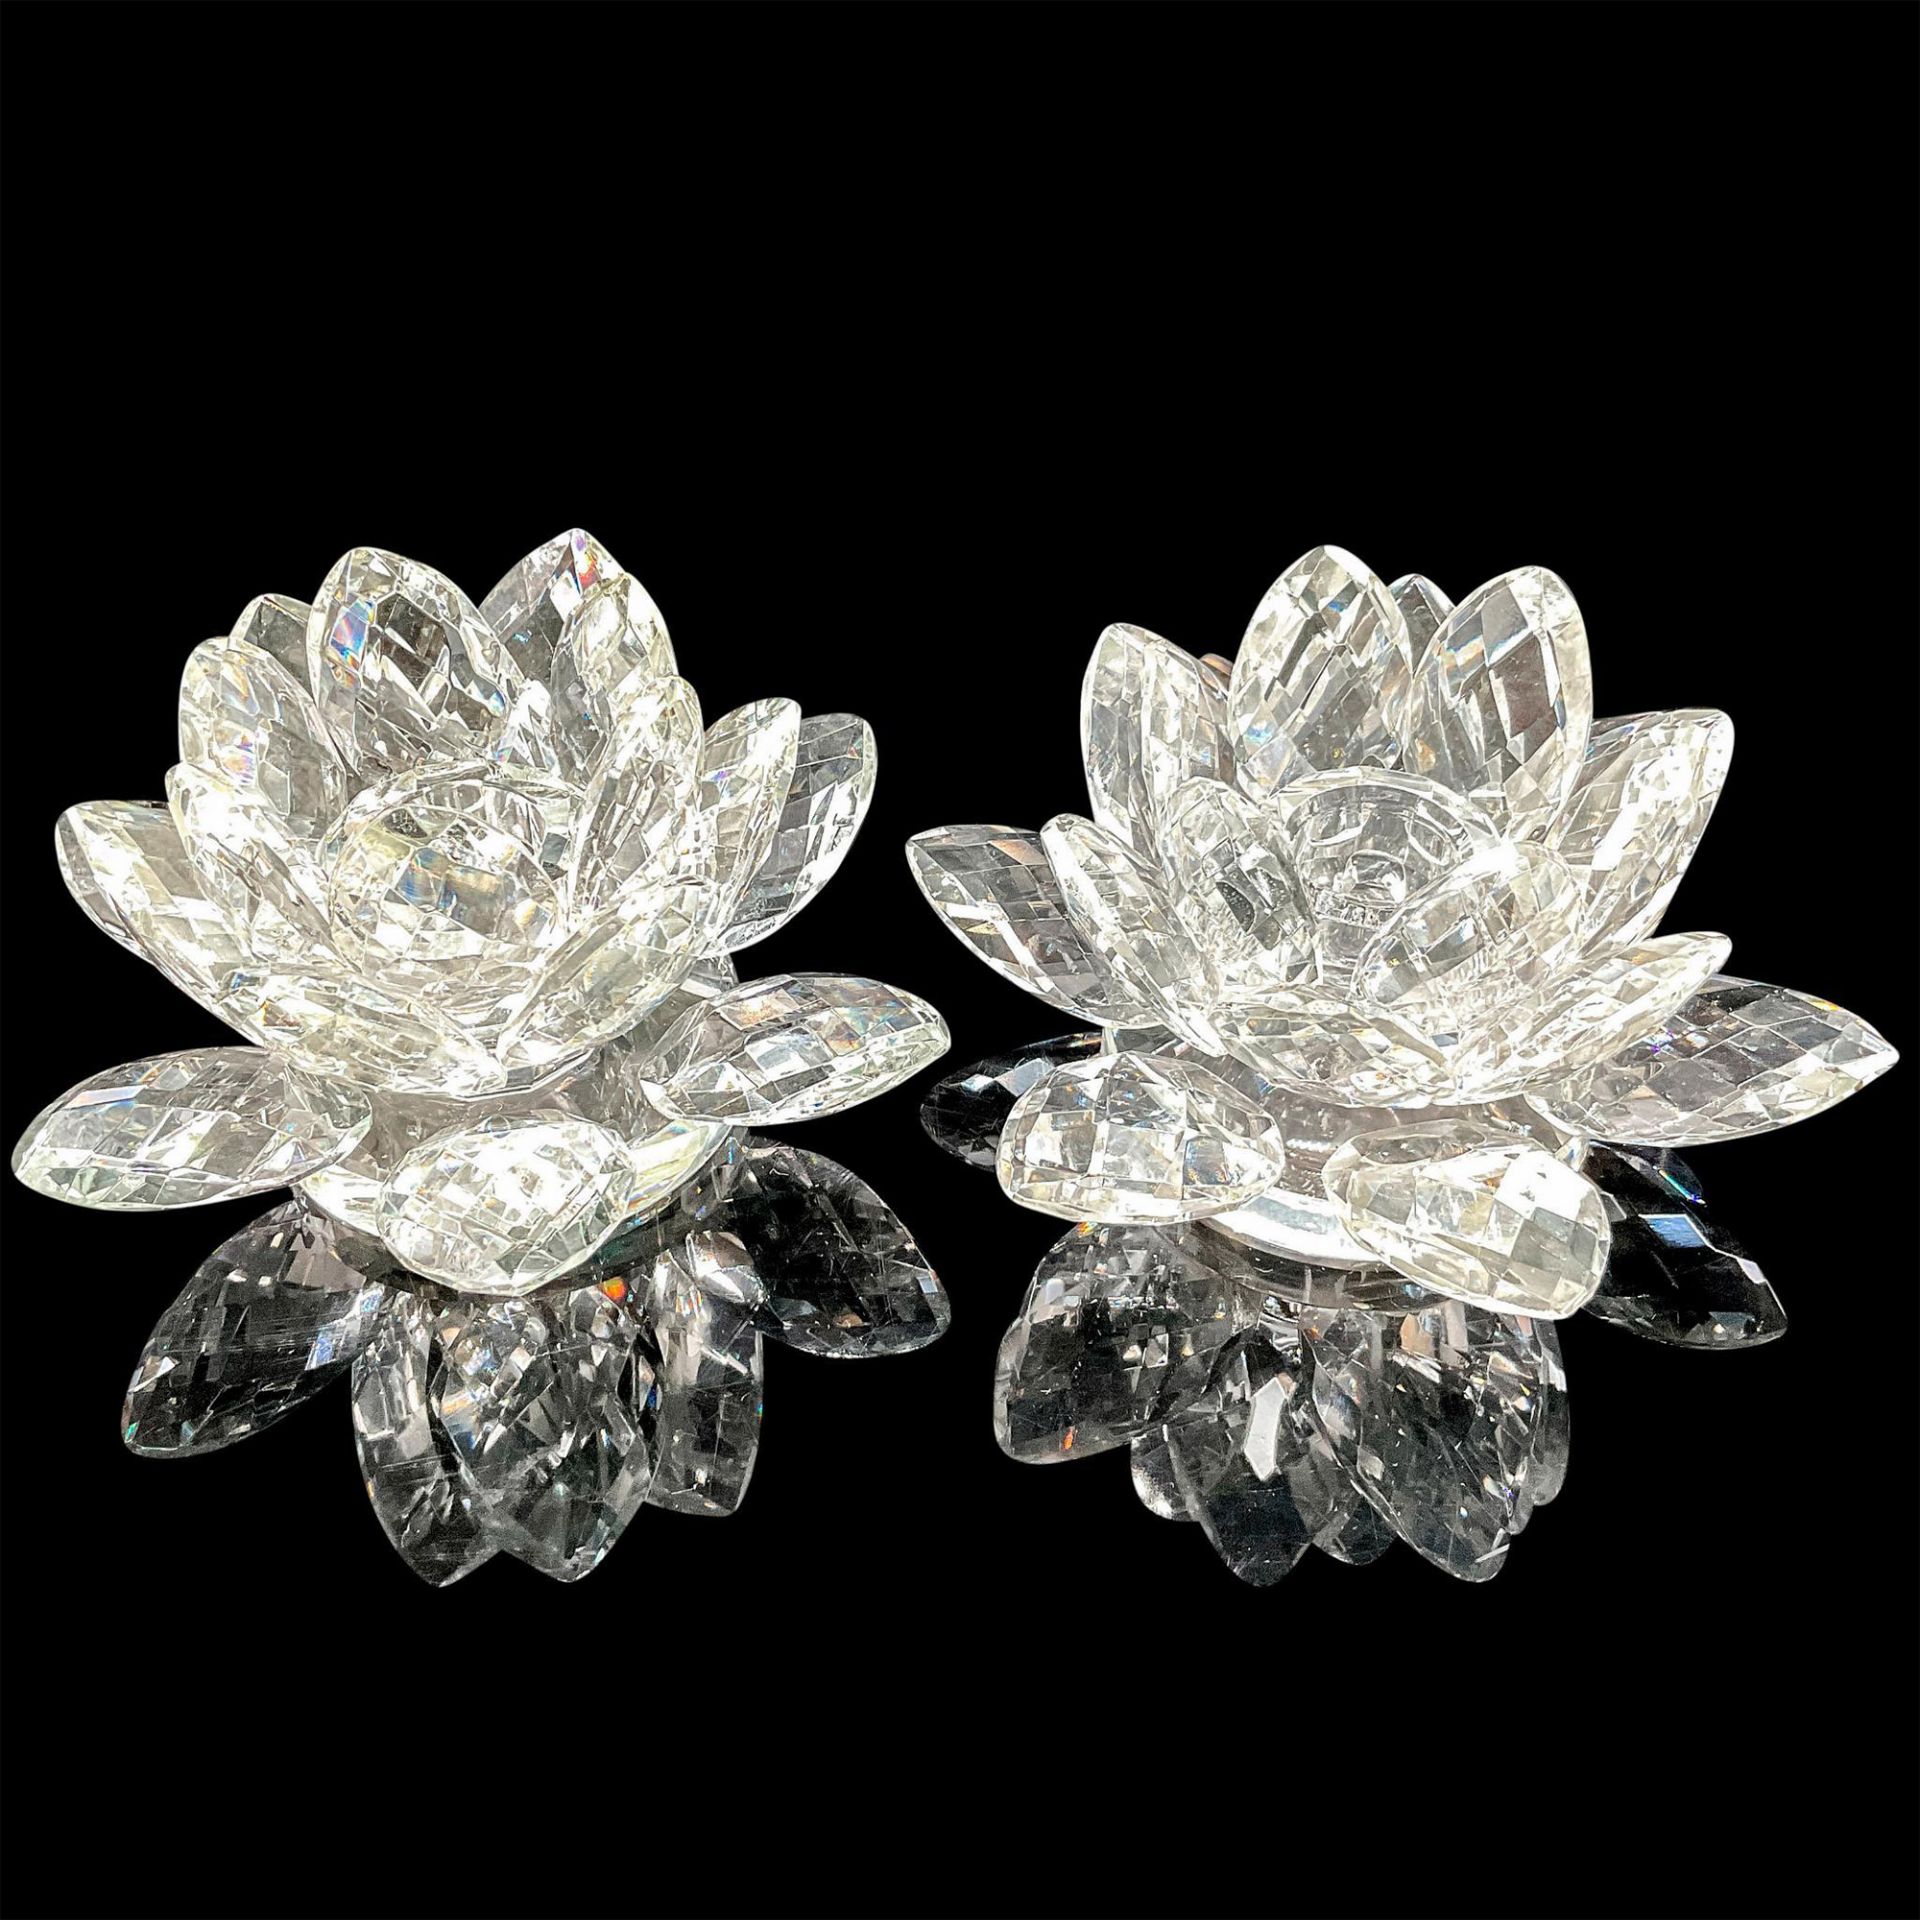 Pair of Shannon Crystal Lotus Candle Holder - Image 2 of 3